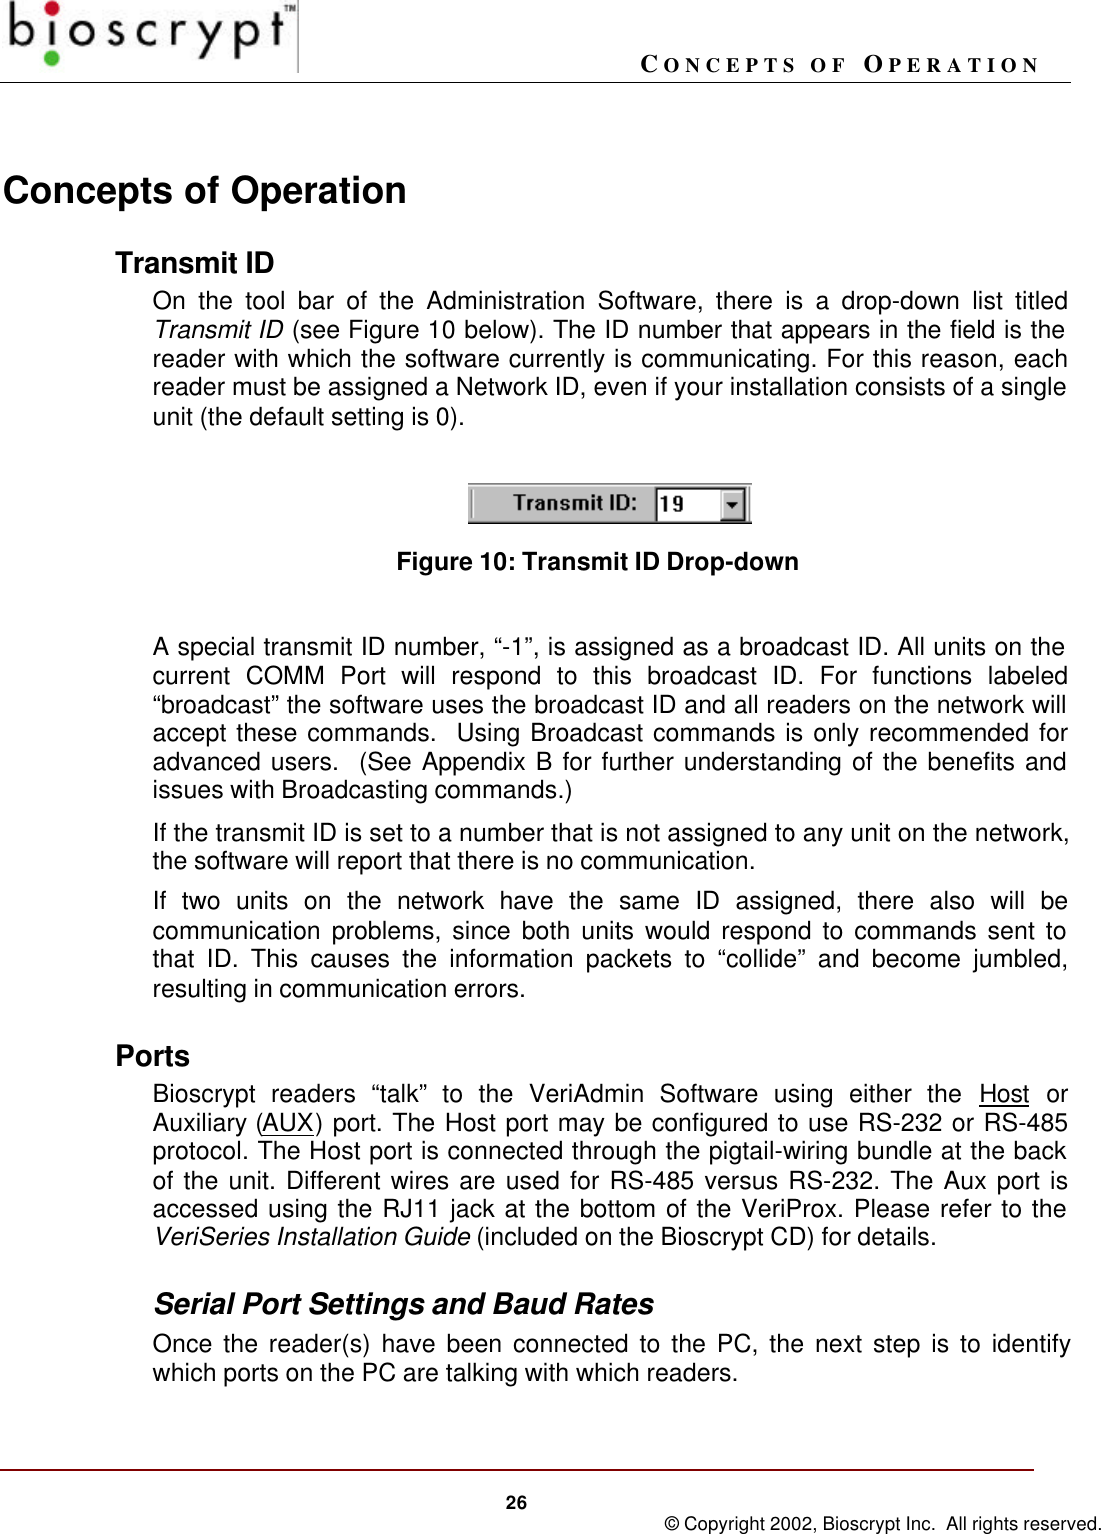 CONCEPTS OF OPERATION26 © Copyright 2002, Bioscrypt Inc.  All rights reserved.Concepts of OperationTransmit IDOn the tool bar of the Administration Software, there is a drop-down list titledTransmit ID (see Figure 10 below). The ID number that appears in the field is thereader with which the software currently is communicating. For this reason, eachreader must be assigned a Network ID, even if your installation consists of a singleunit (the default setting is 0).Figure 10: Transmit ID Drop-downA special transmit ID number, “-1”, is assigned as a broadcast ID. All units on thecurrent COMM Port will respond to this broadcast ID. For functions labeled“broadcast” the software uses the broadcast ID and all readers on the network willaccept these commands.  Using Broadcast commands is only recommended foradvanced users.  (See Appendix B for further understanding of the benefits andissues with Broadcasting commands.)If the transmit ID is set to a number that is not assigned to any unit on the network,the software will report that there is no communication.If two units on the network have the same ID assigned, there also will becommunication problems, since both units would respond to commands sent tothat ID. This causes the information packets to “collide” and become jumbled,resulting in communication errors.PortsBioscrypt readers “talk” to the VeriAdmin Software using either the Host orAuxiliary (AUX) port. The Host port may be configured to use RS-232 or RS-485protocol. The Host port is connected through the pigtail-wiring bundle at the backof the unit. Different wires are used for RS-485 versus RS-232. The Aux port isaccessed using the RJ11 jack at the bottom of the VeriProx. Please refer to theVeriSeries Installation Guide (included on the Bioscrypt CD) for details.Serial Port Settings and Baud RatesOnce the reader(s) have been connected to the PC, the next step is to identifywhich ports on the PC are talking with which readers.